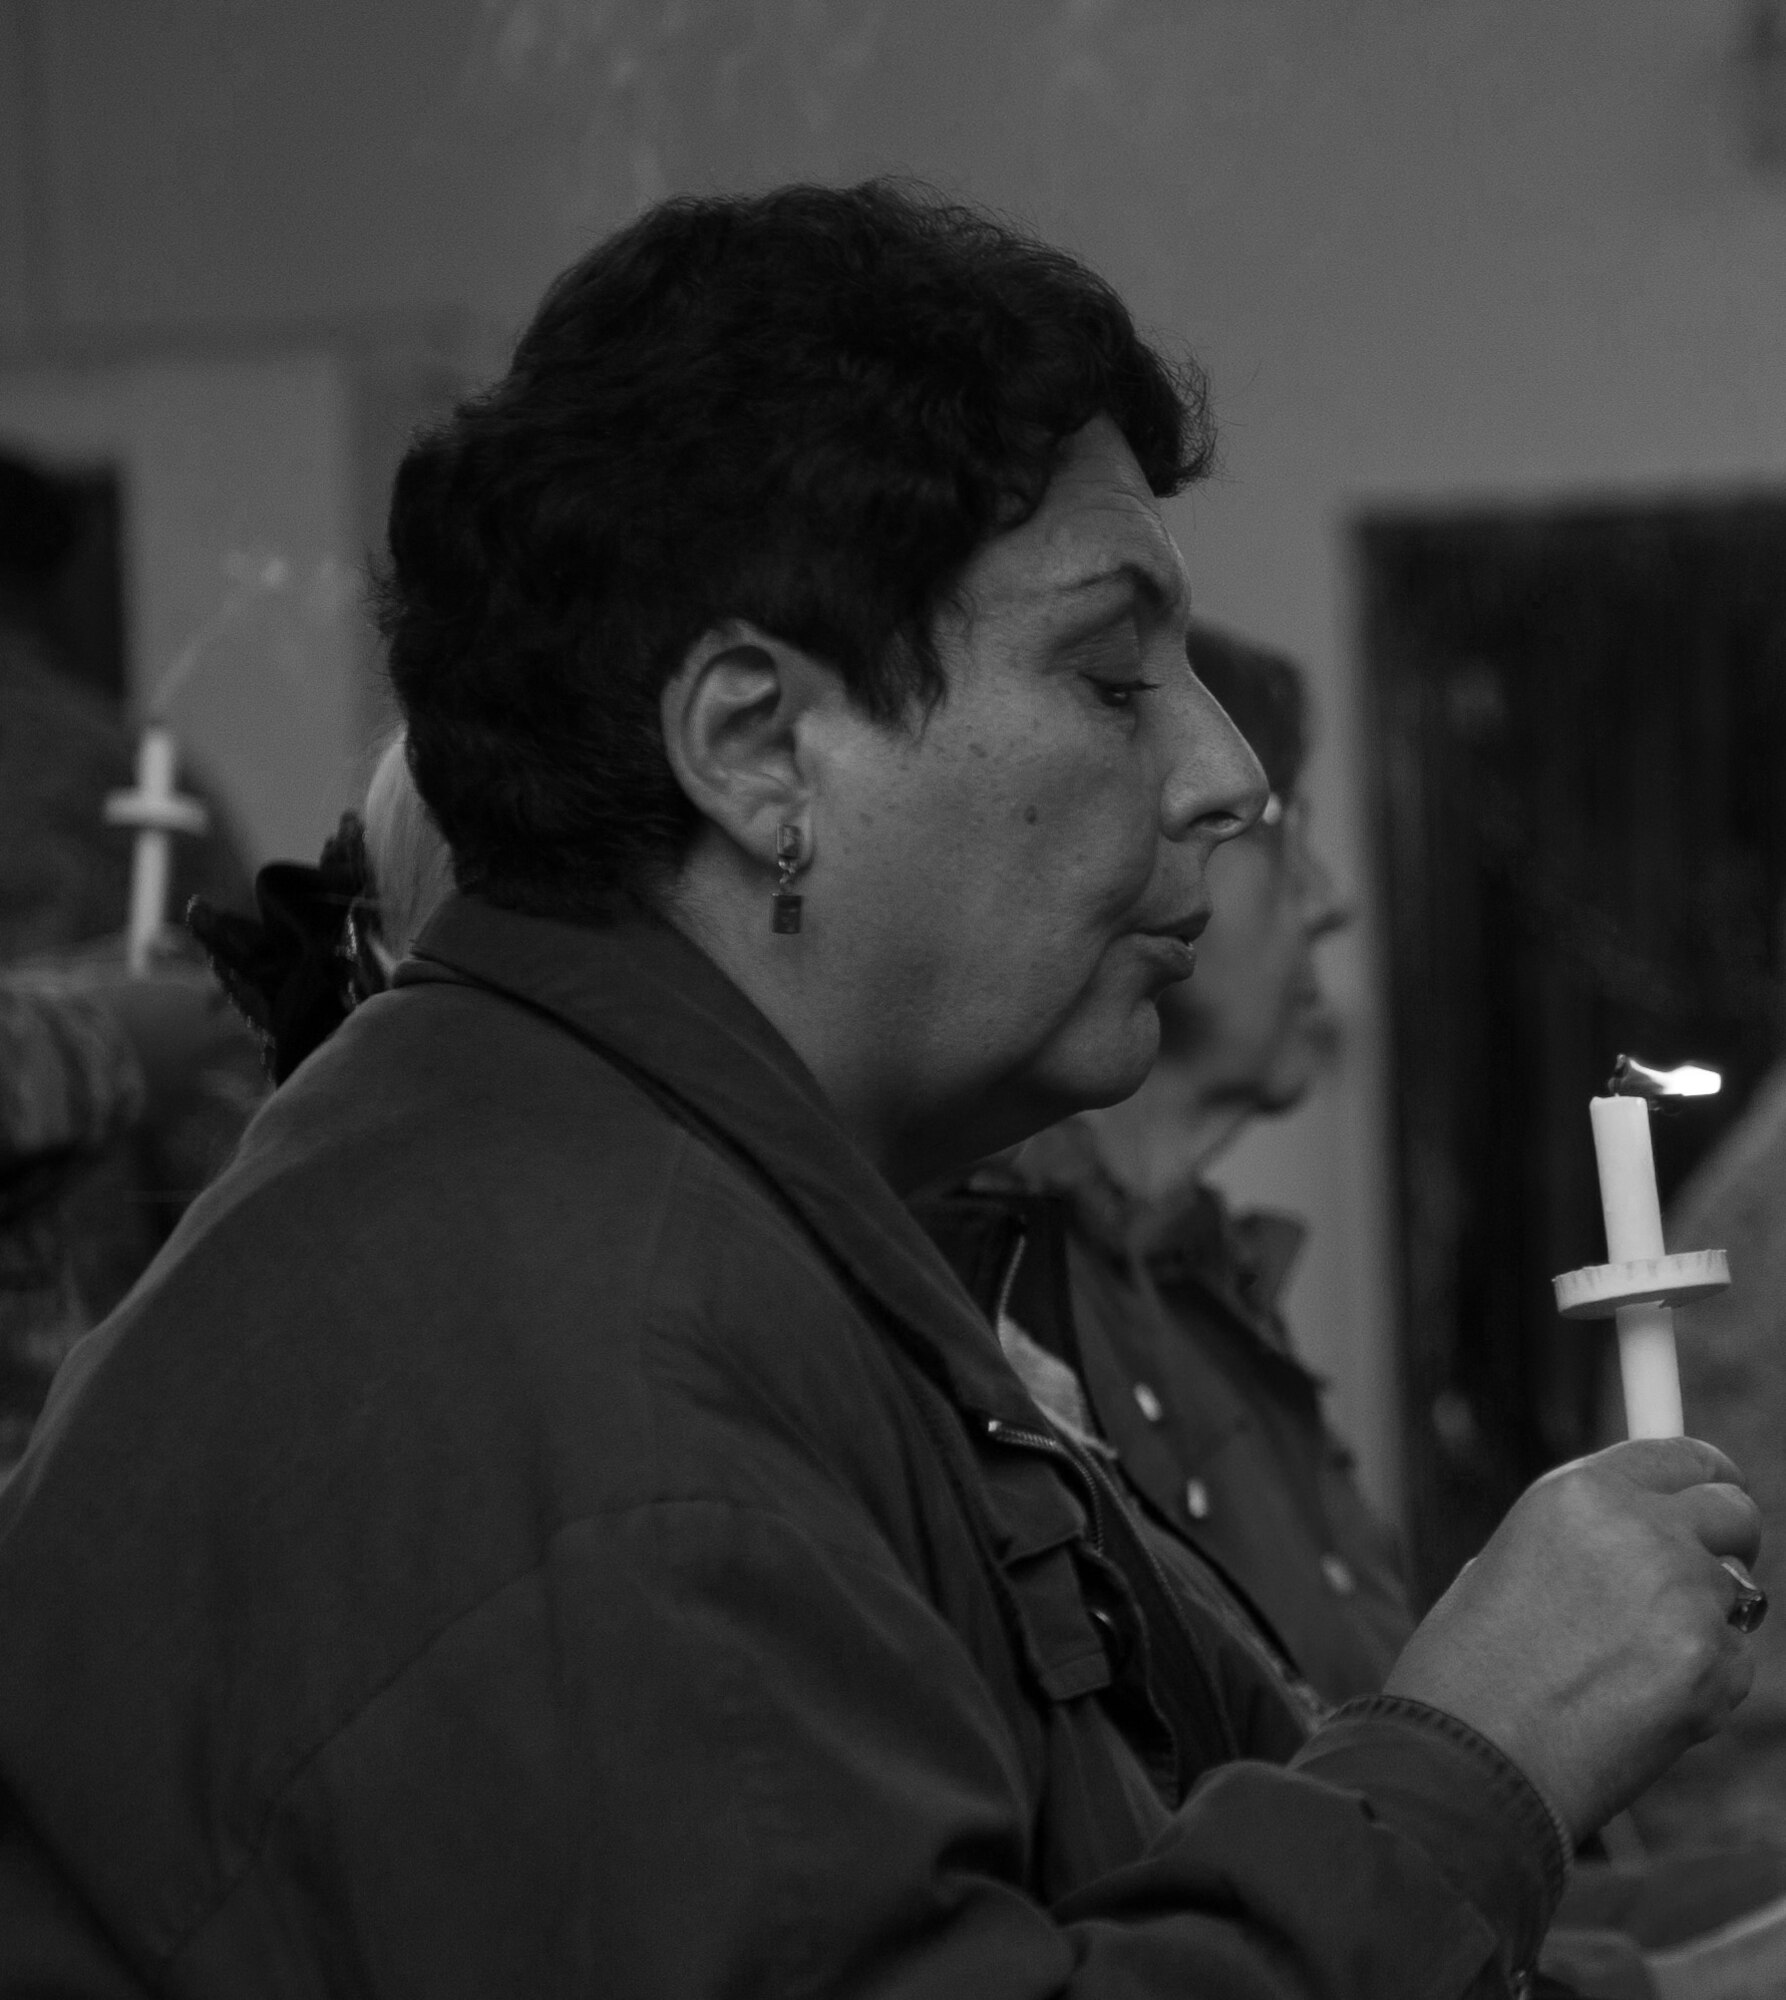 A woman blows out her candle to signal the end of a candlelight vigil at Ramstein Air Base, Germany, Oct. 27, 2016. According to the Center for Disease Control and Prevention, over the course of a year, more than 10 million U.S. citizens are victims of domestic violence, sexual abuse, child violence and bullying or suicide. The devastating physical, emotional, and psychological consequences of interpersonal violence cross generations and last lifetimes. (U.S. Air Force photo by Airman 1st Class Lane T. Plummer)